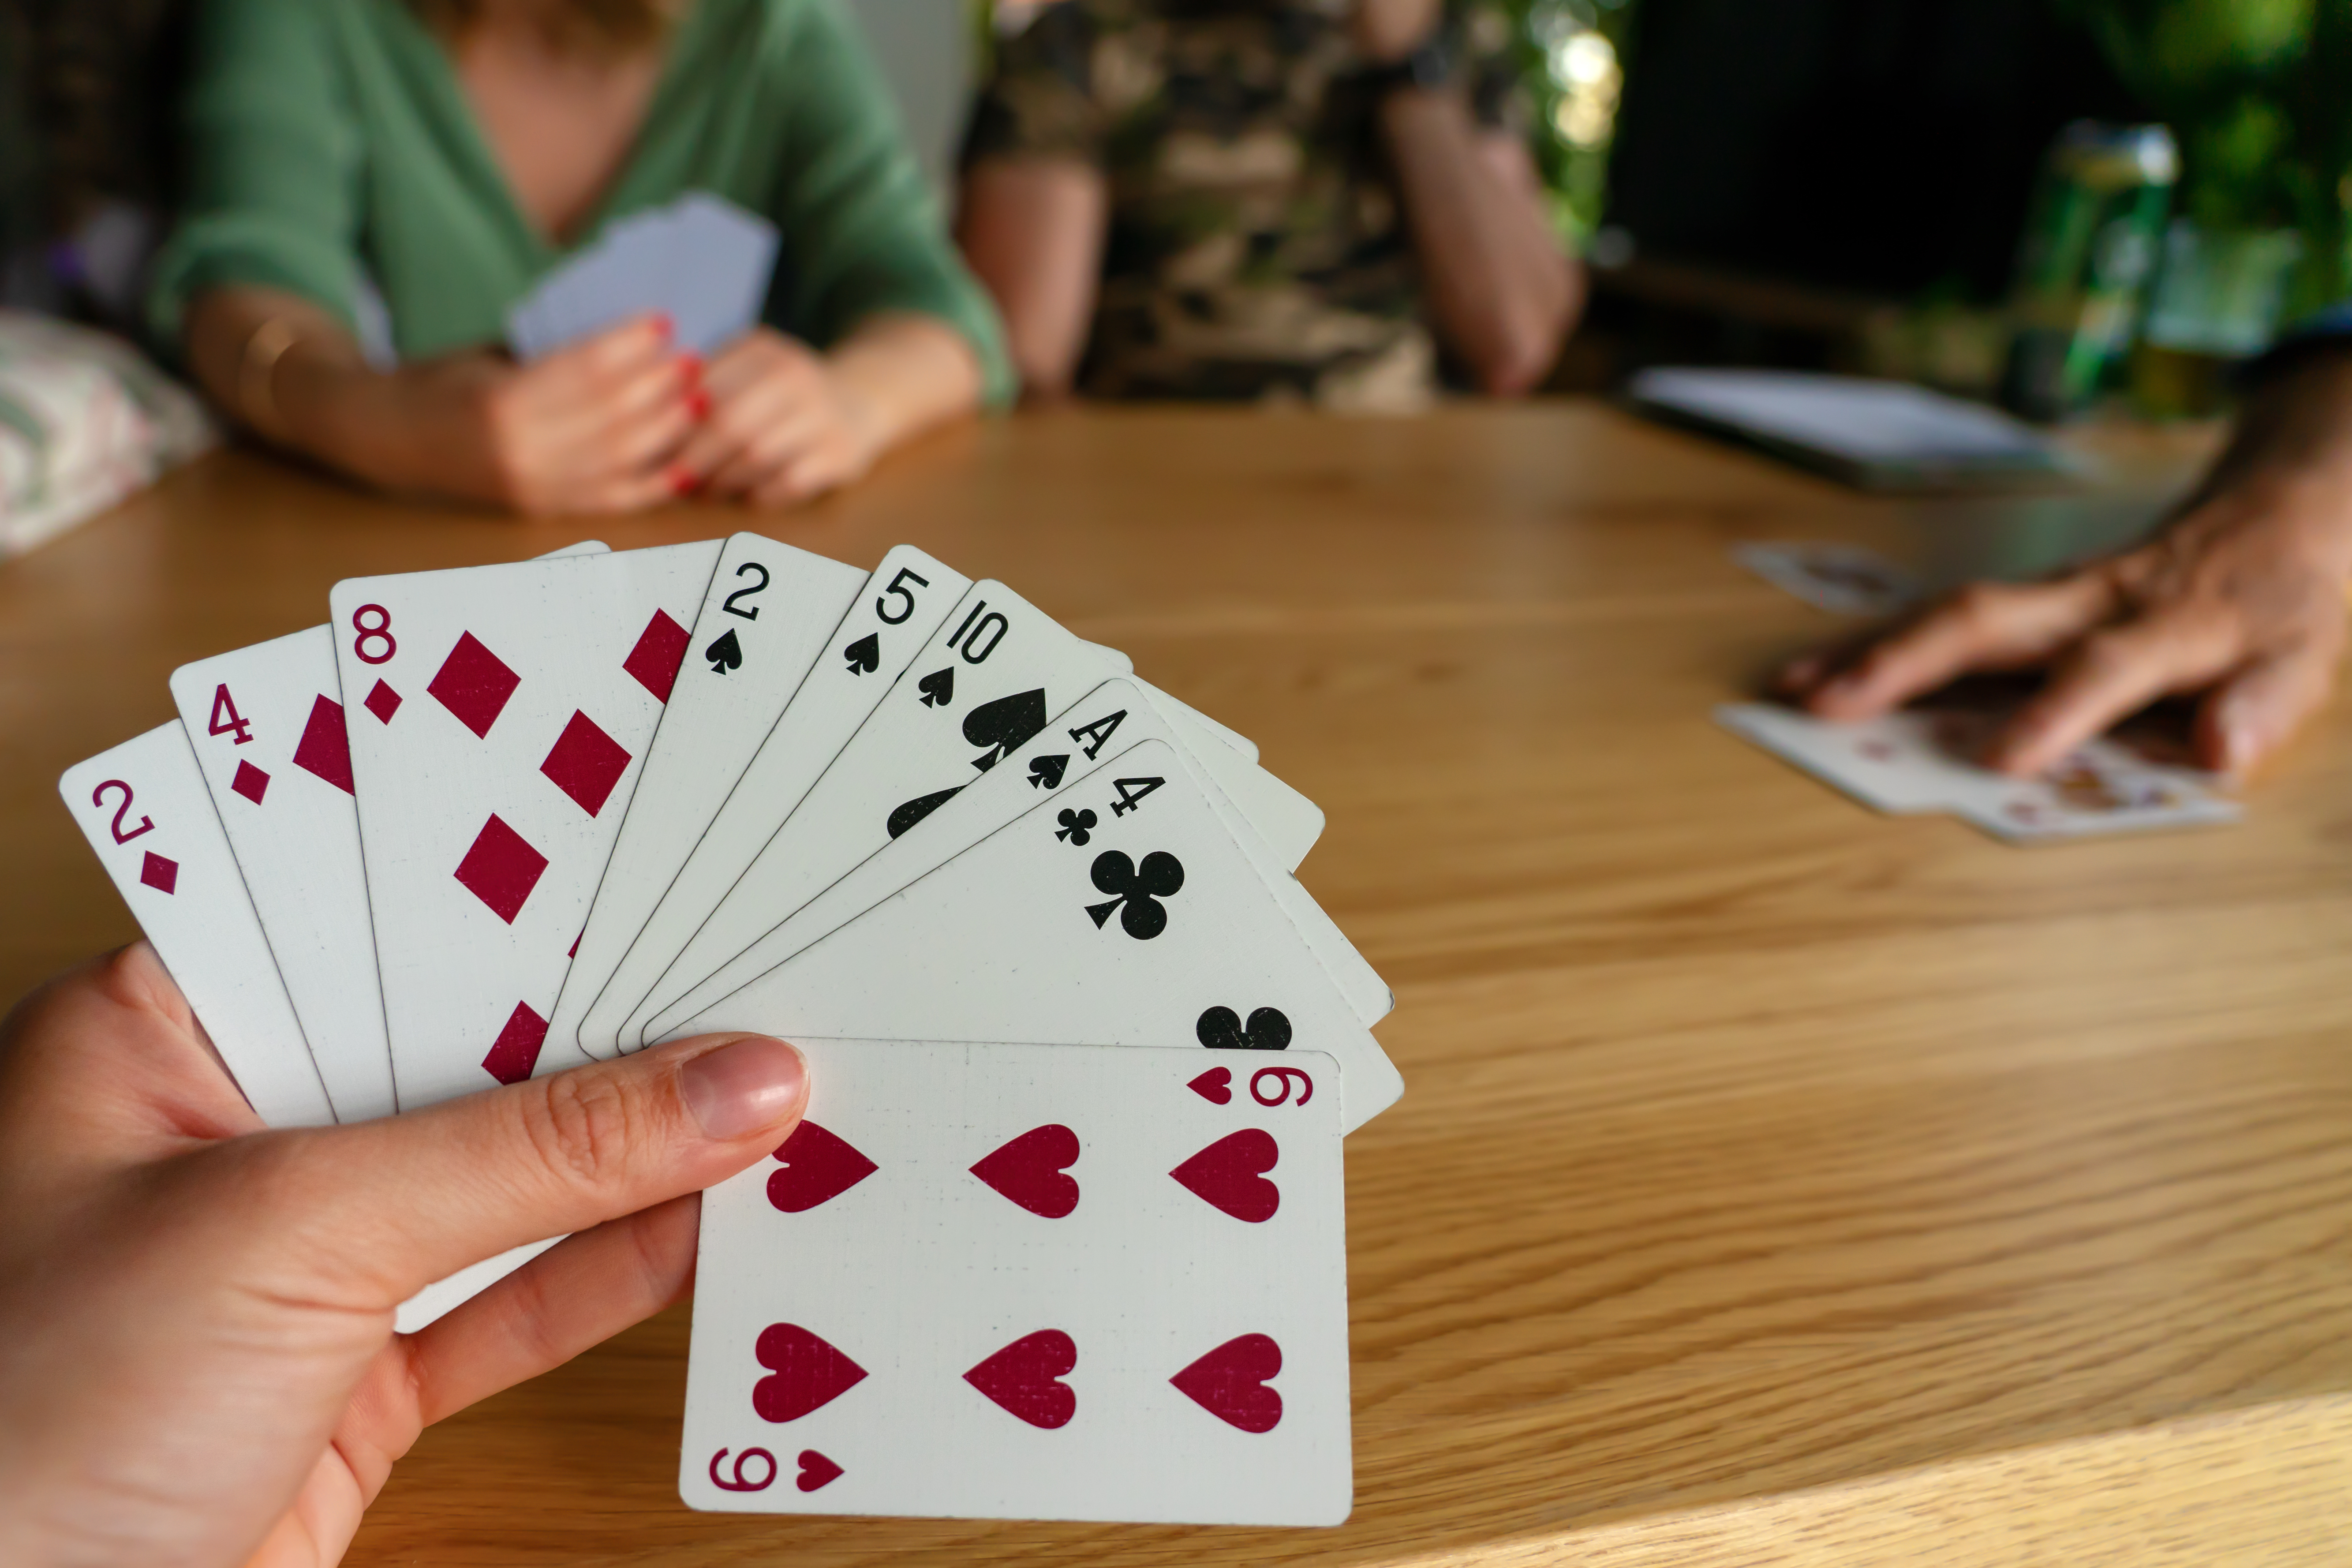 6 Fun Card Games to Play Alone & Engage Your Mind